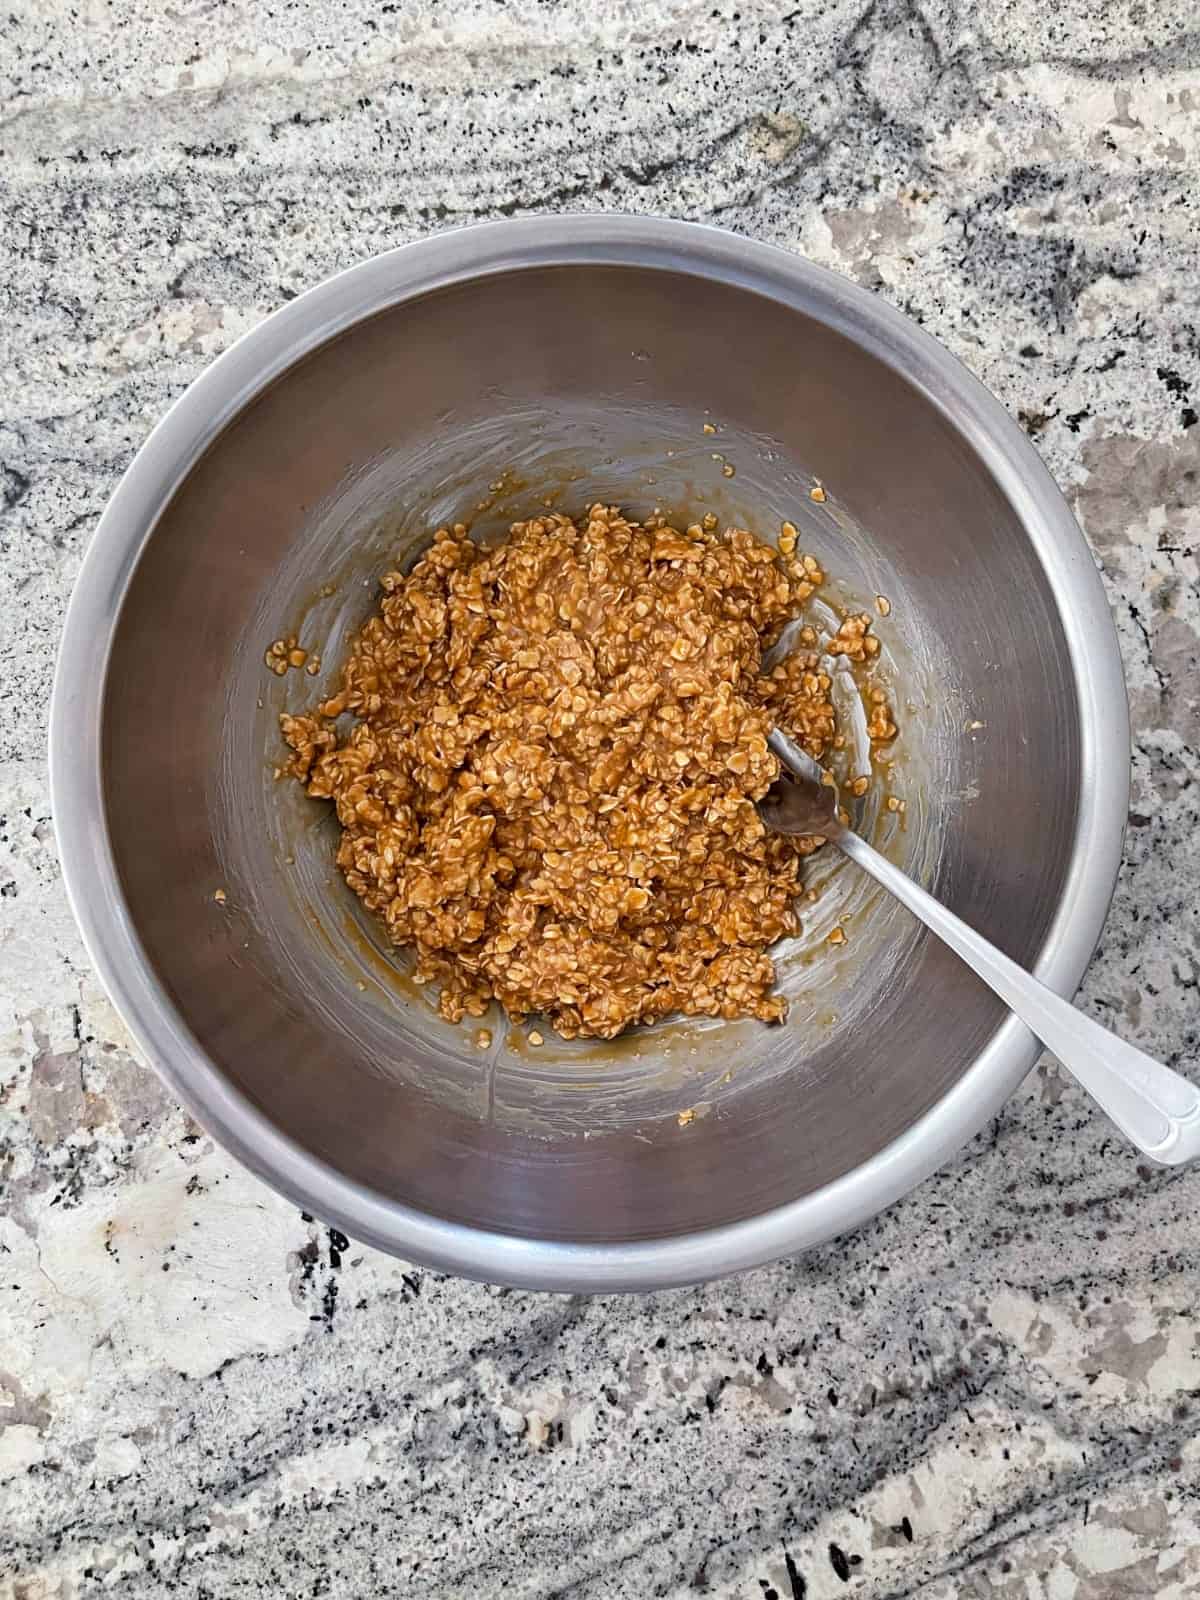 Combining peanut butter granola bar batter in mixing bowl with fork.